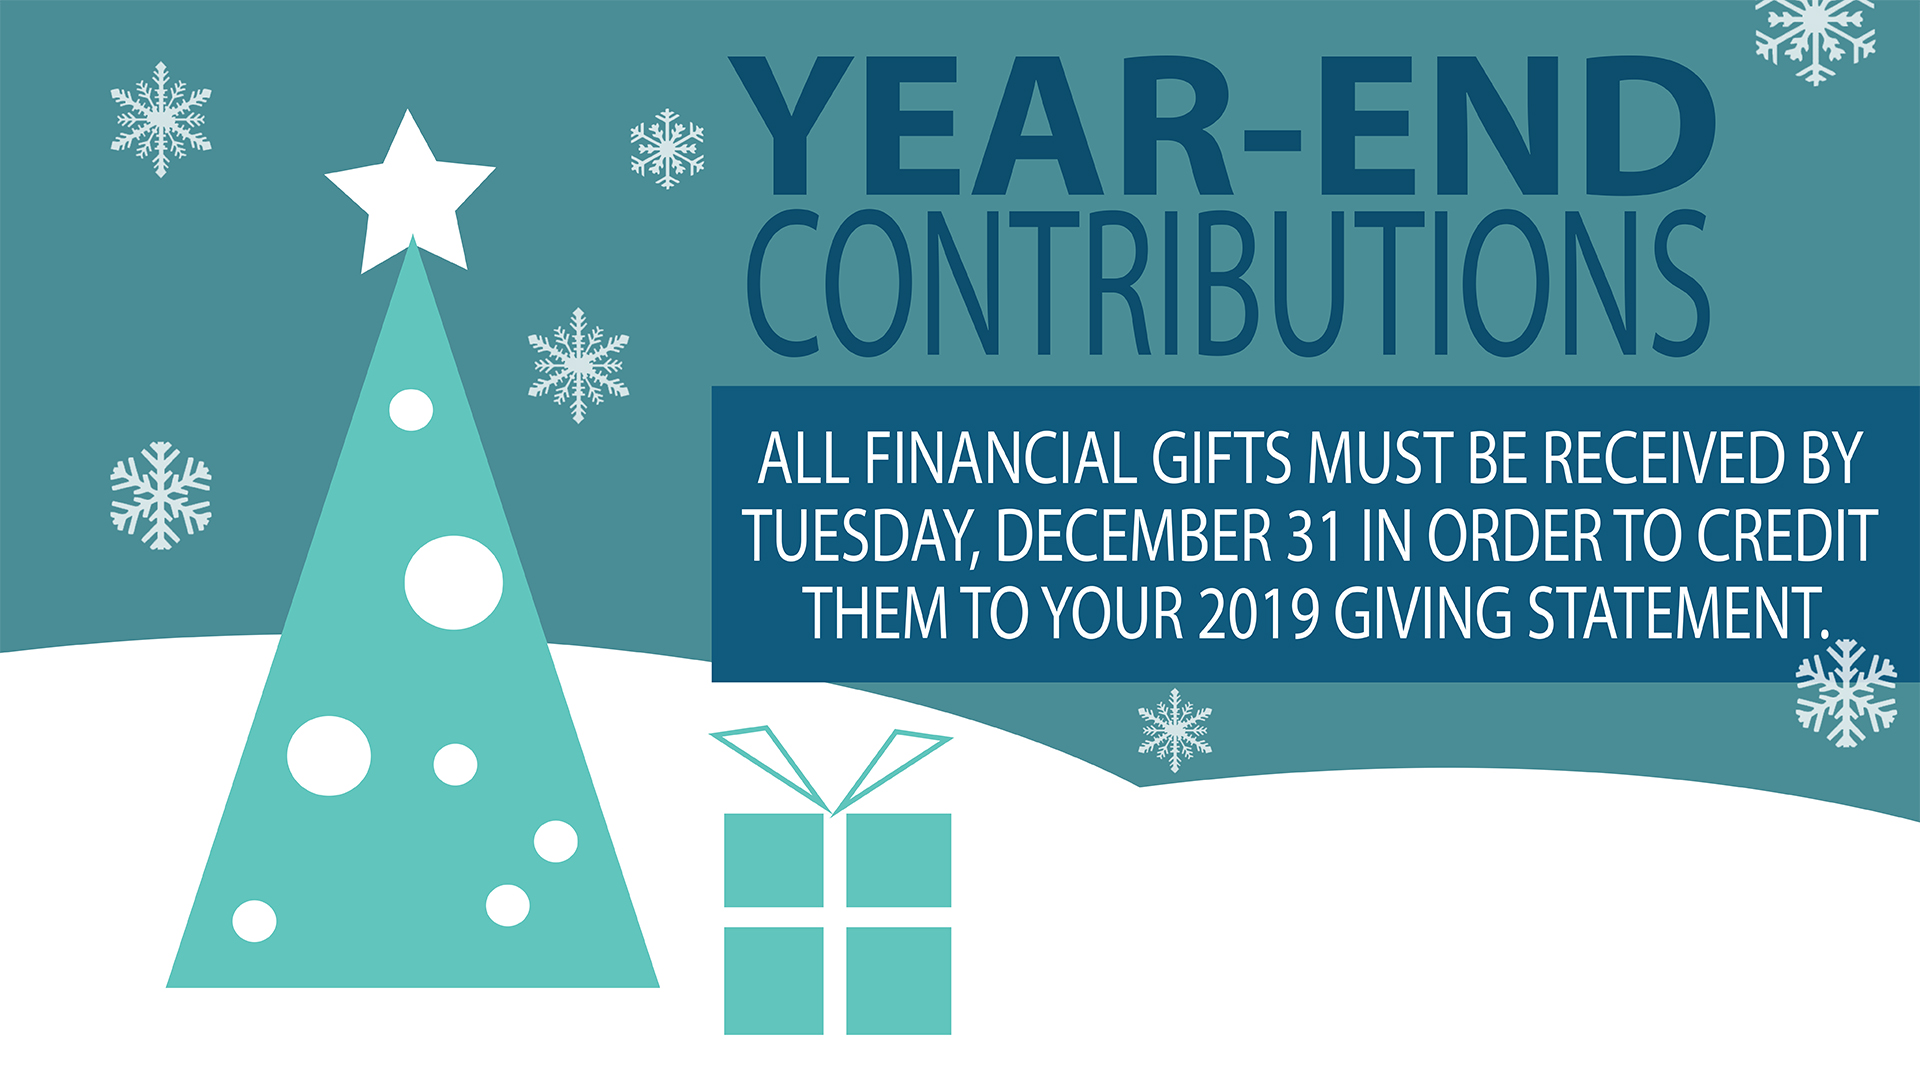 stay committed in giving contributions